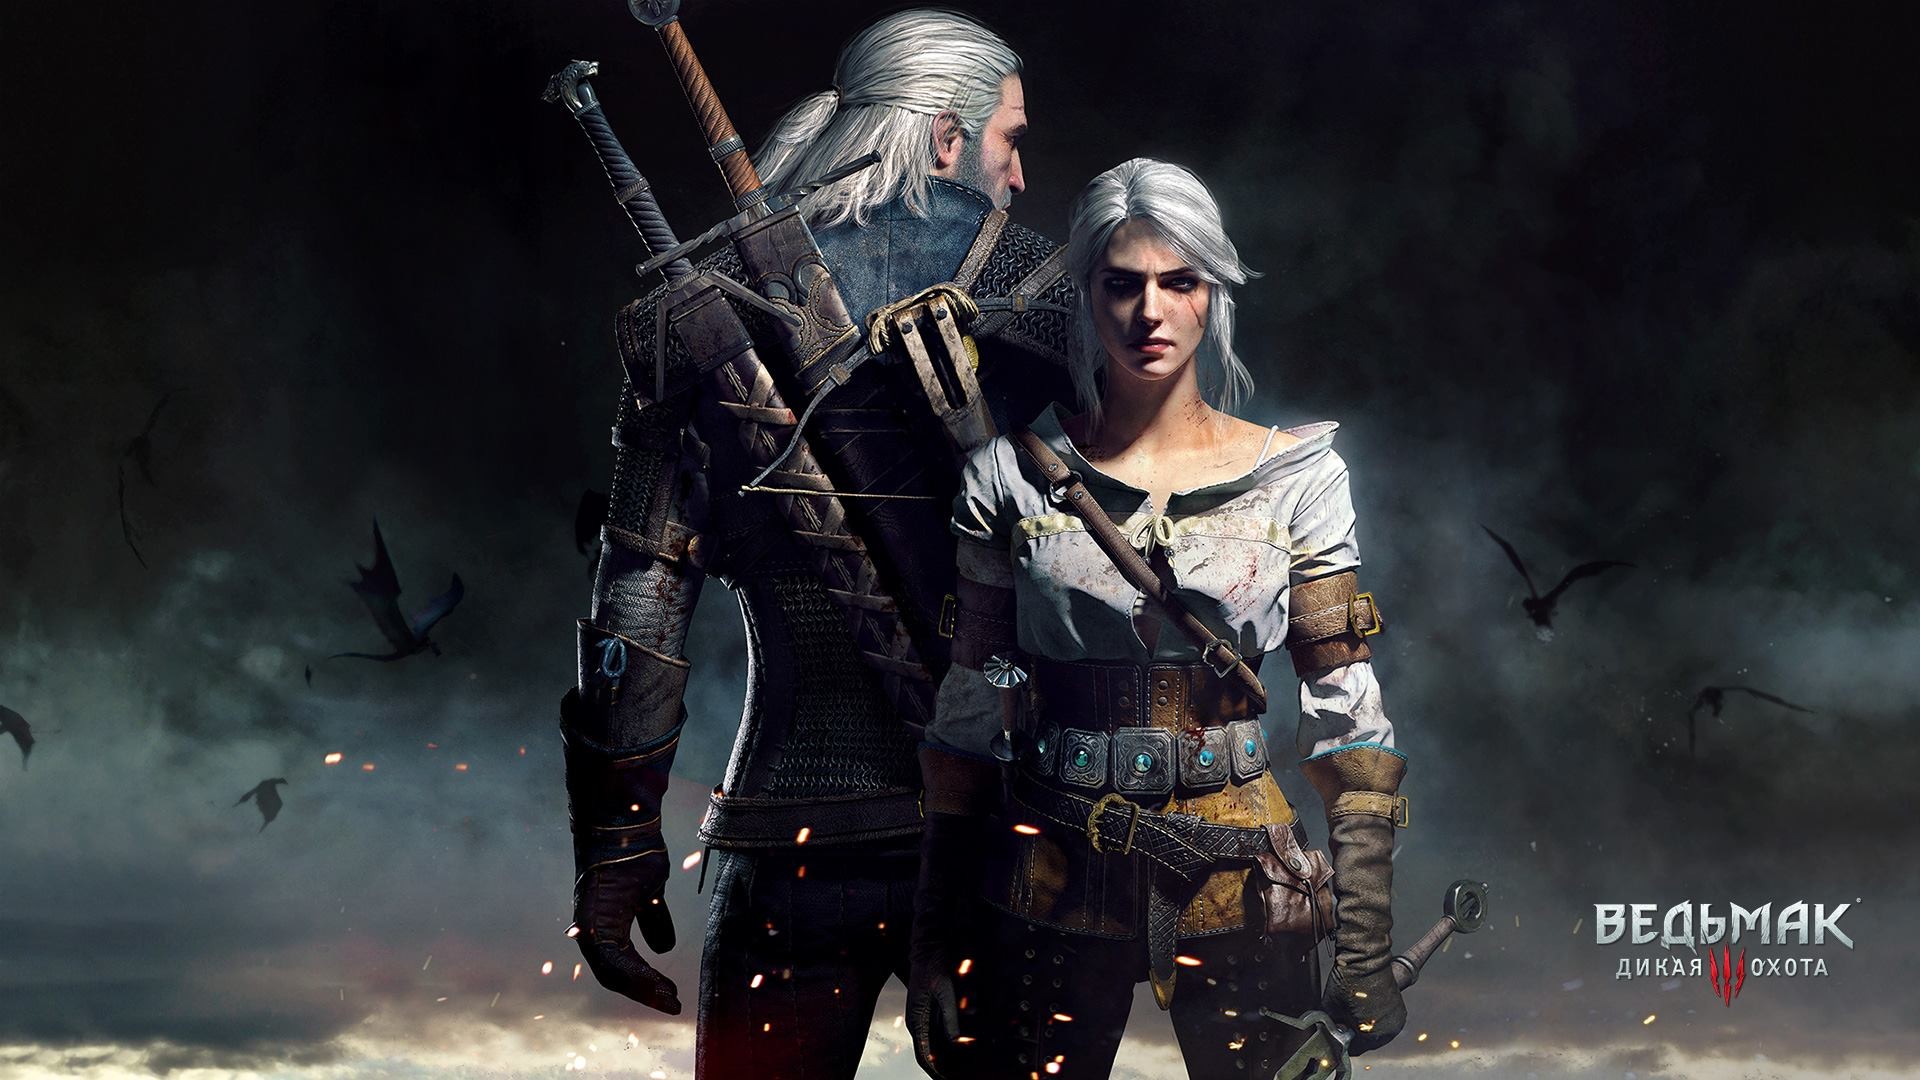 General 1920x1080 The Witcher 3: Wild Hunt video games Geralt of Rivia Cirilla Fiona Elen Riannon The Witcher fantasy girl PC gaming fantasy men video game girls CD Projekt RED video game art